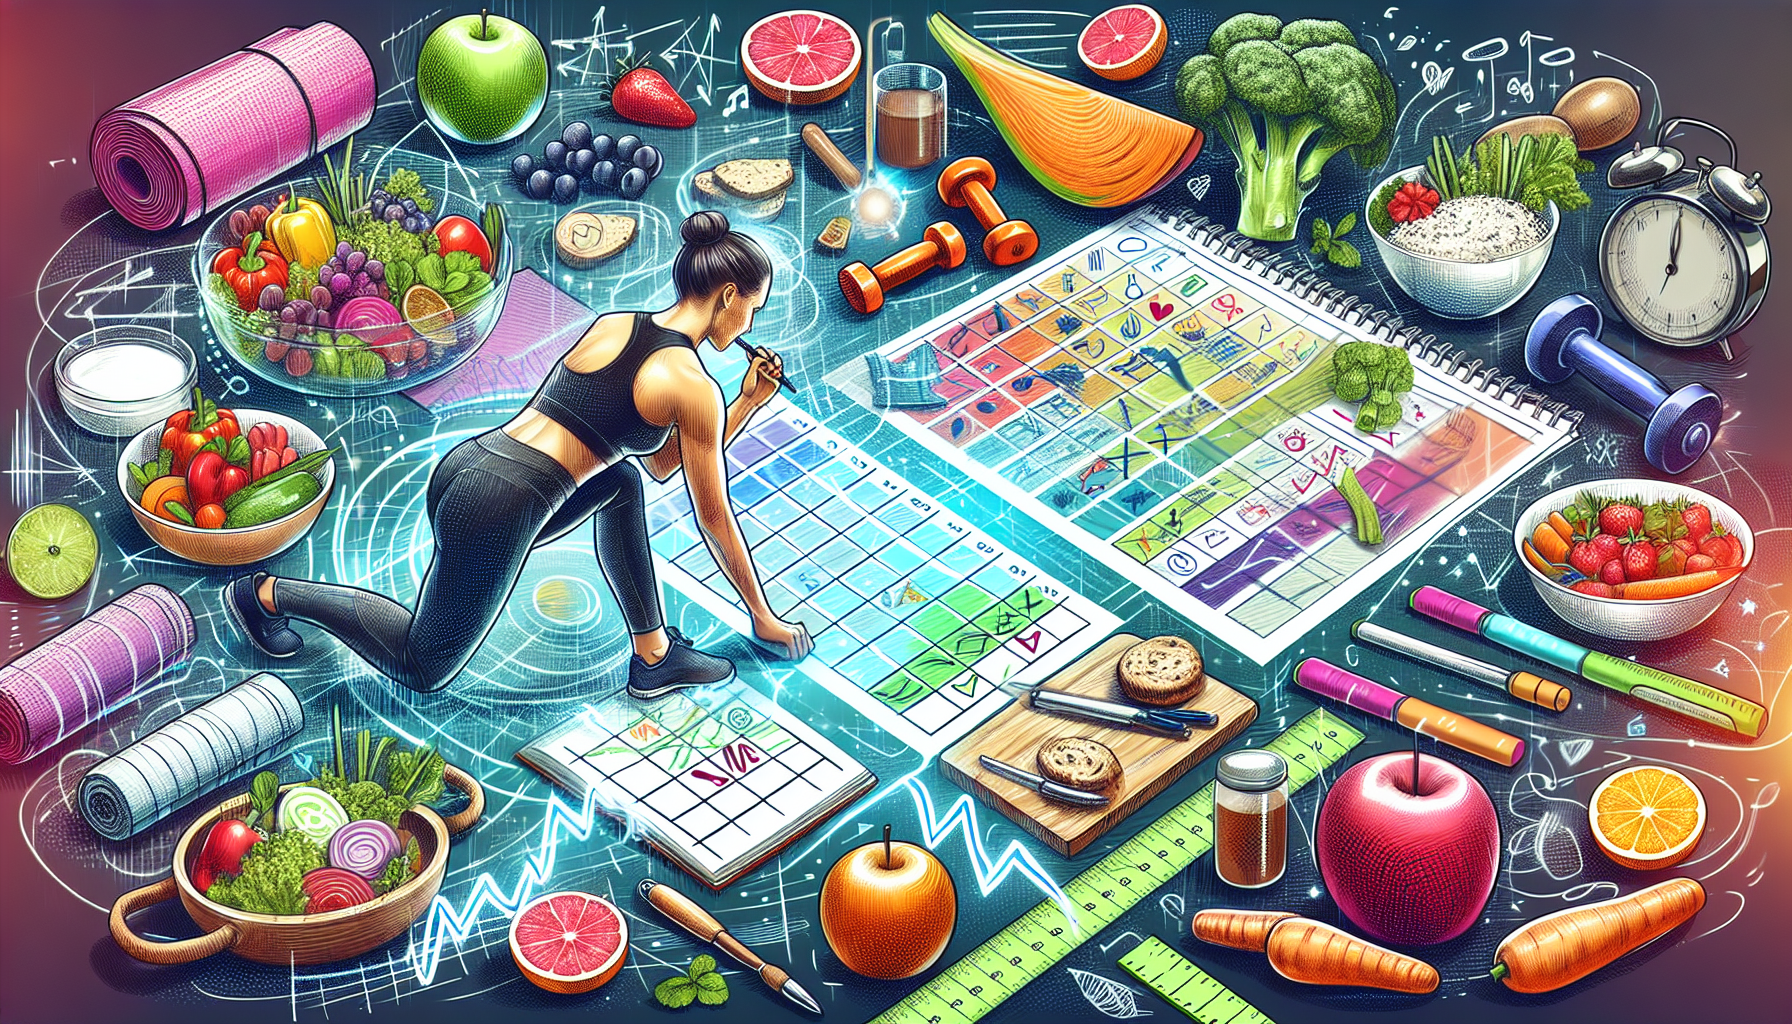 Illustration of a person planning their workout and diet